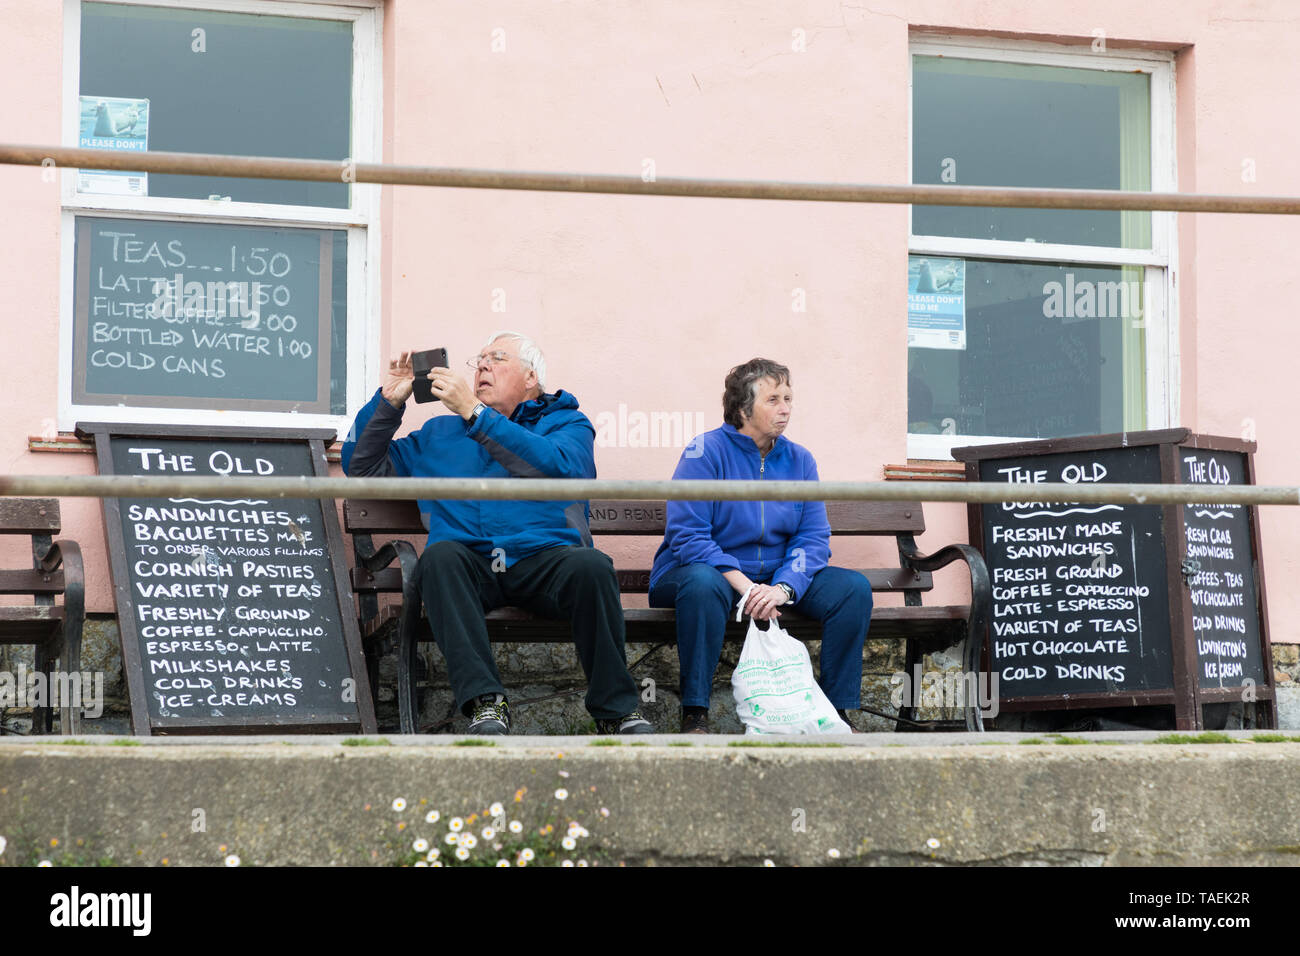 Lyme Regis, Dorset, UK: Elderly man and woman sit on a bench between blackboards listing food and drink. He looks at a mobile phone, she stares ahead. Stock Photo